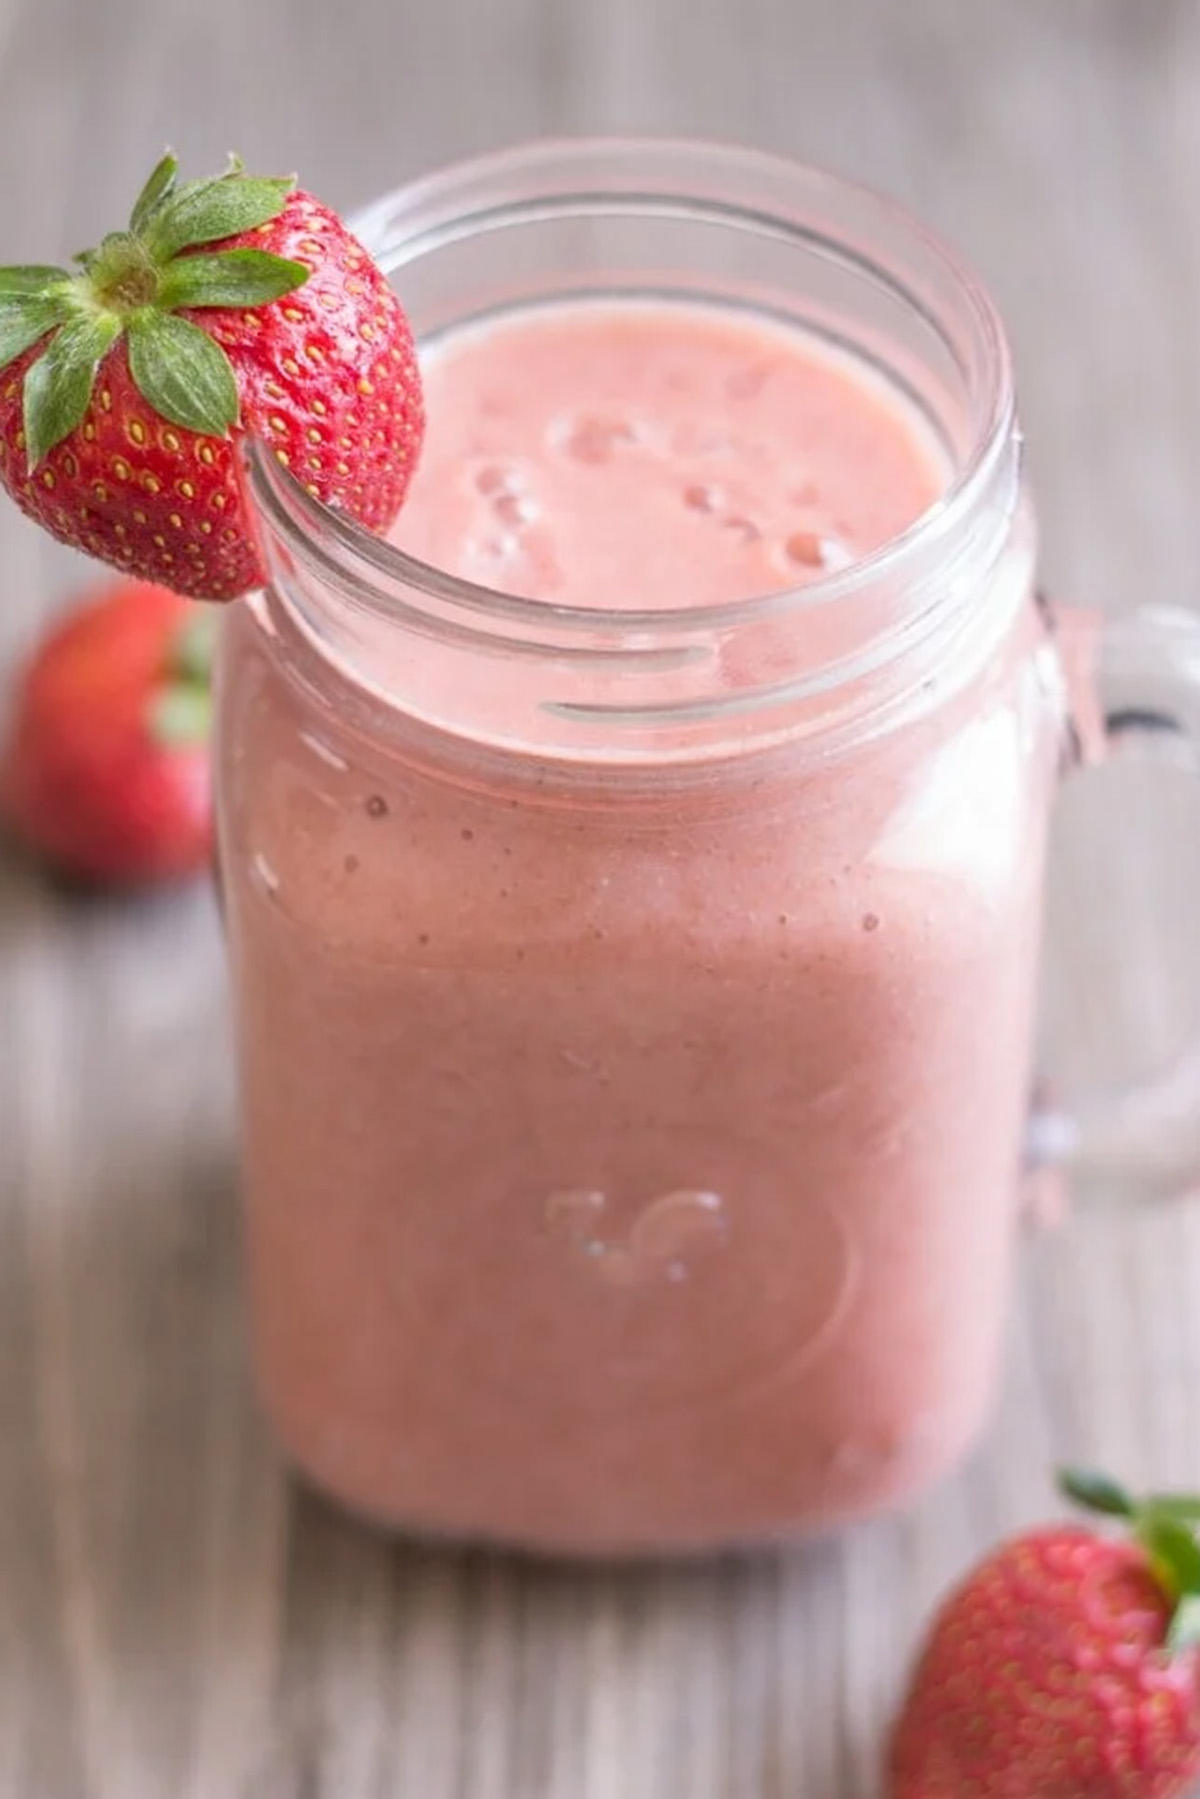 10 Best Detox Smoothies For A Flat Belly Cleanse - The Smoothie Diet